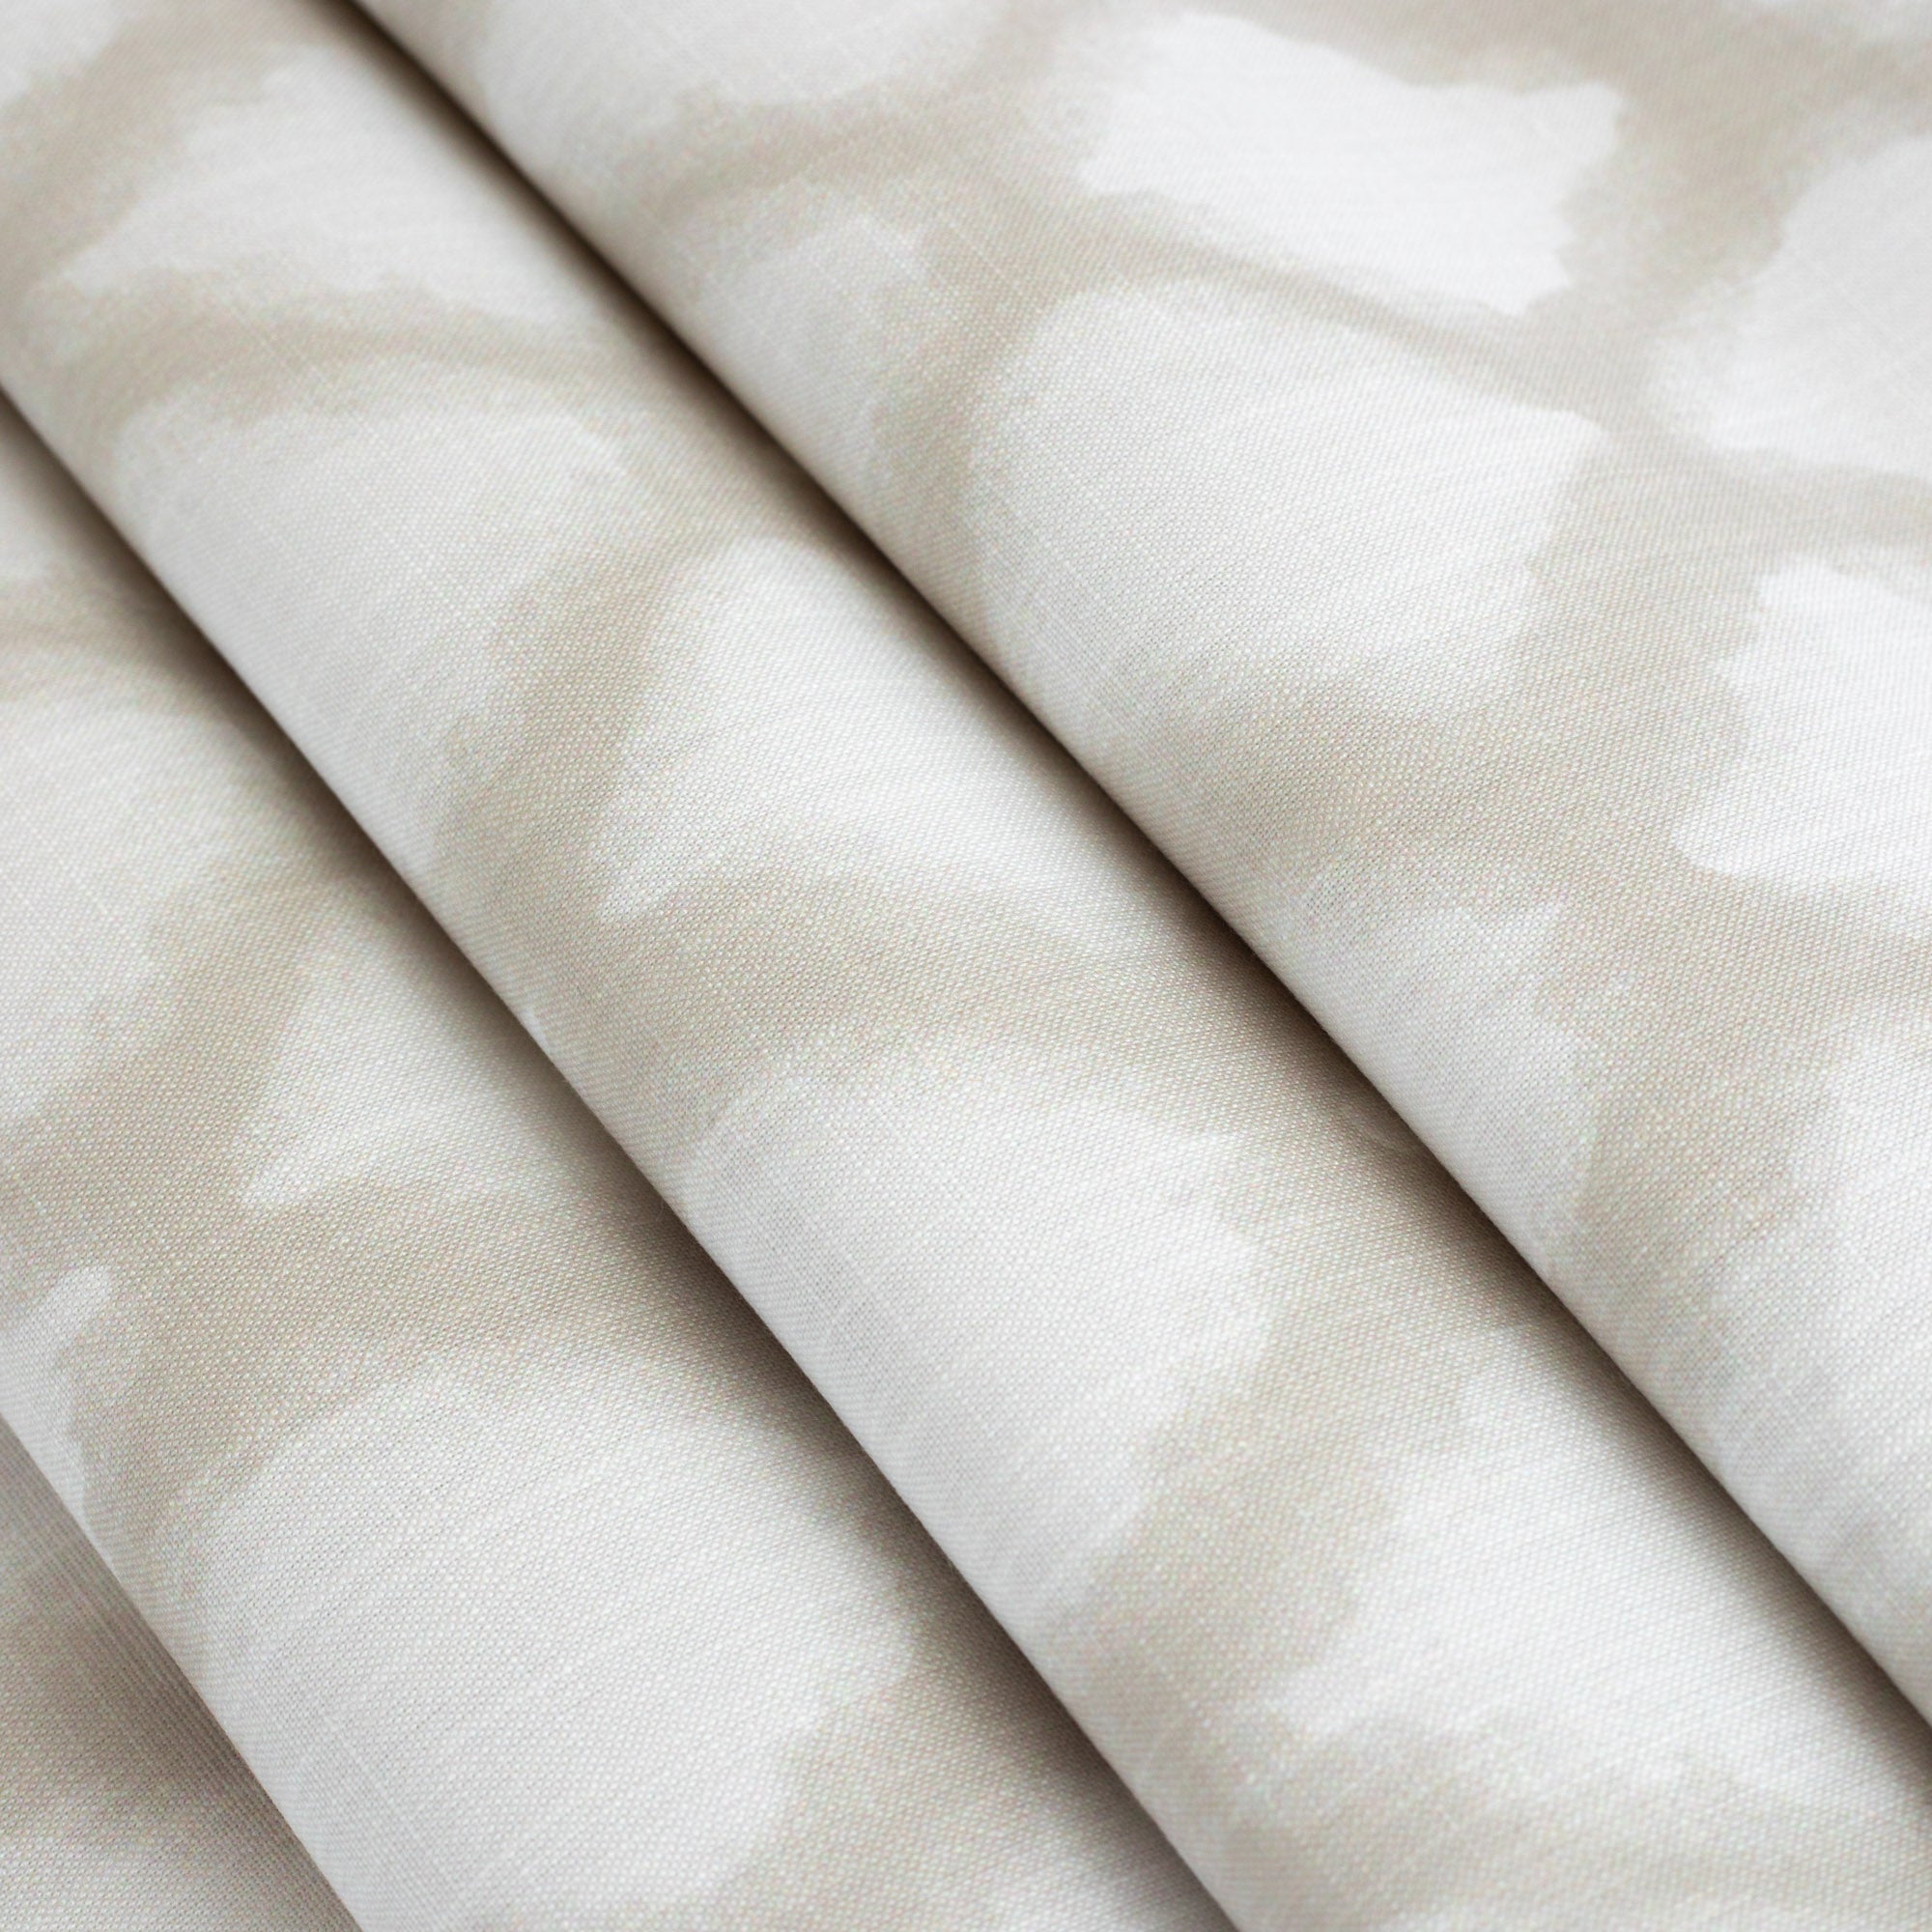 Melrose Sand, a beige and white ikat print fabric : view 3